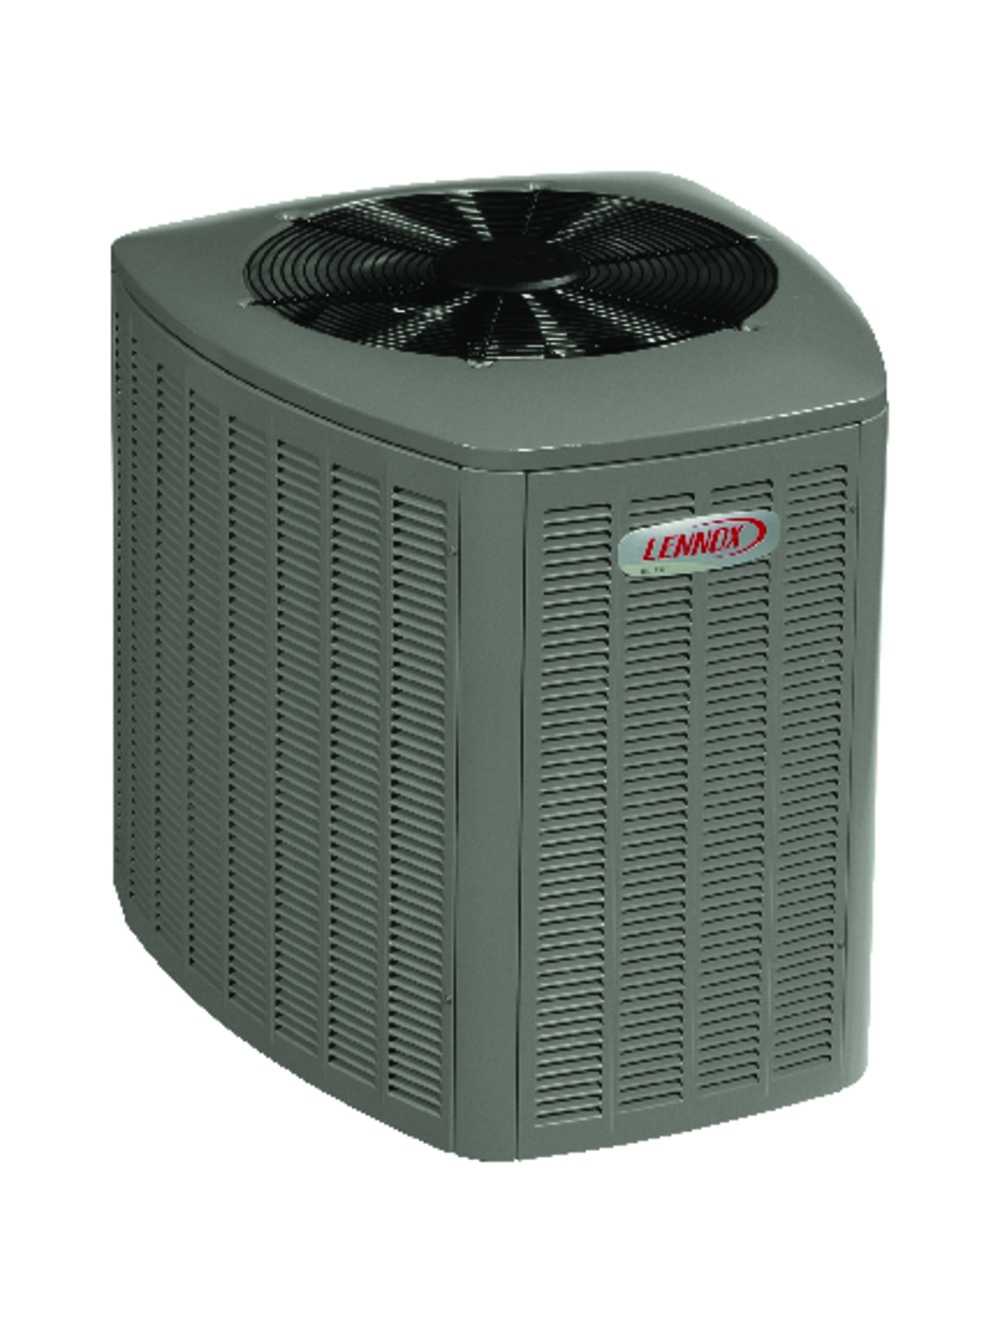 are-lennox-air-conditioners-any-good-lennox-xc25-high-efficiency